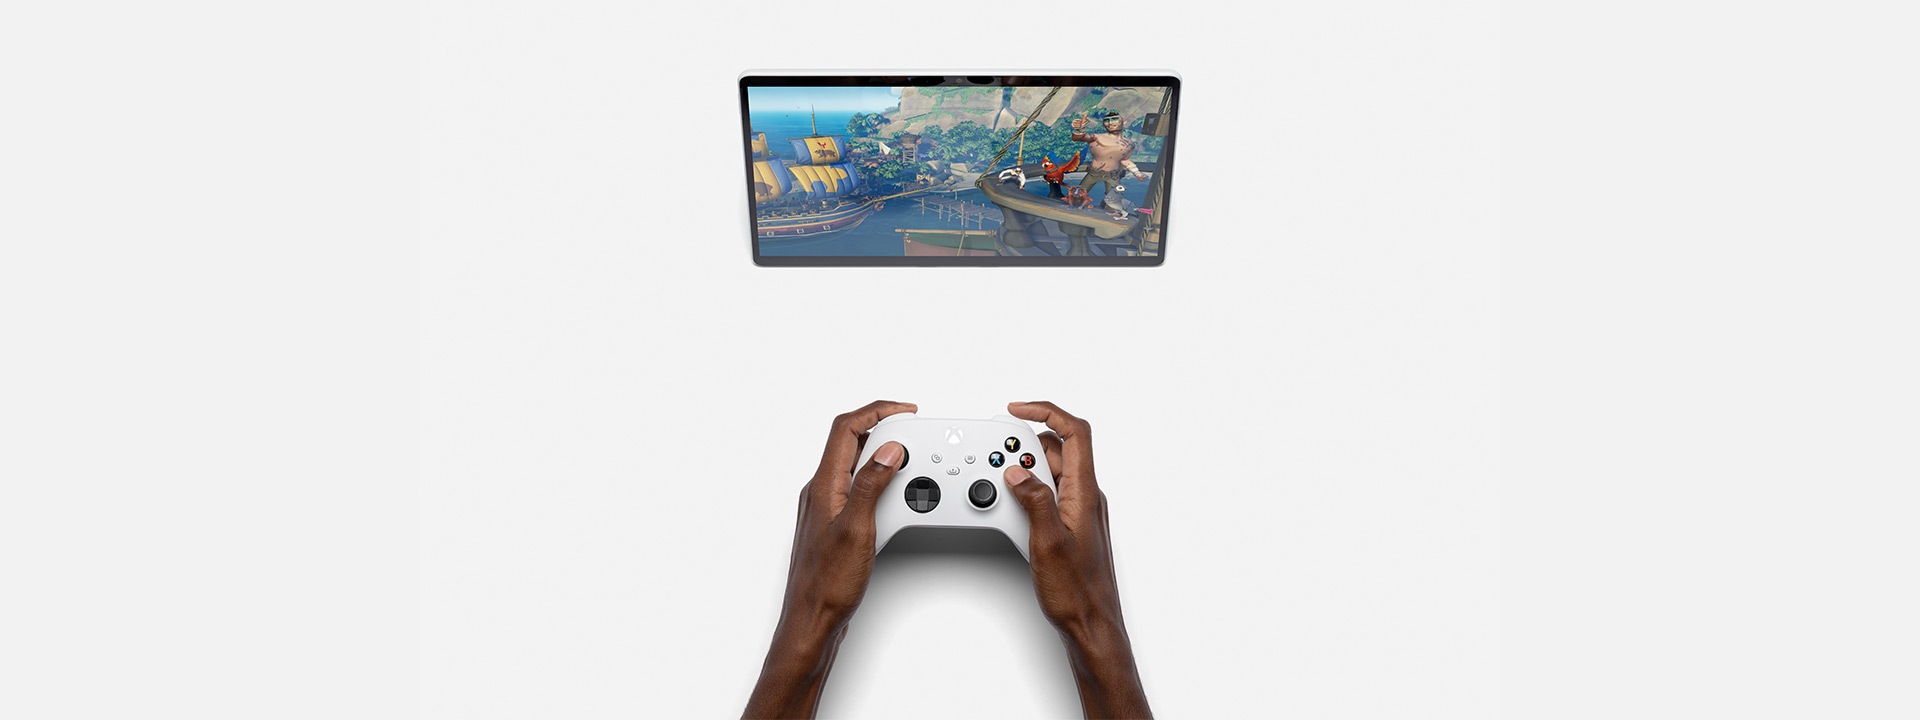 Surface Pro X shown with the Xbox app and Xbox controller.